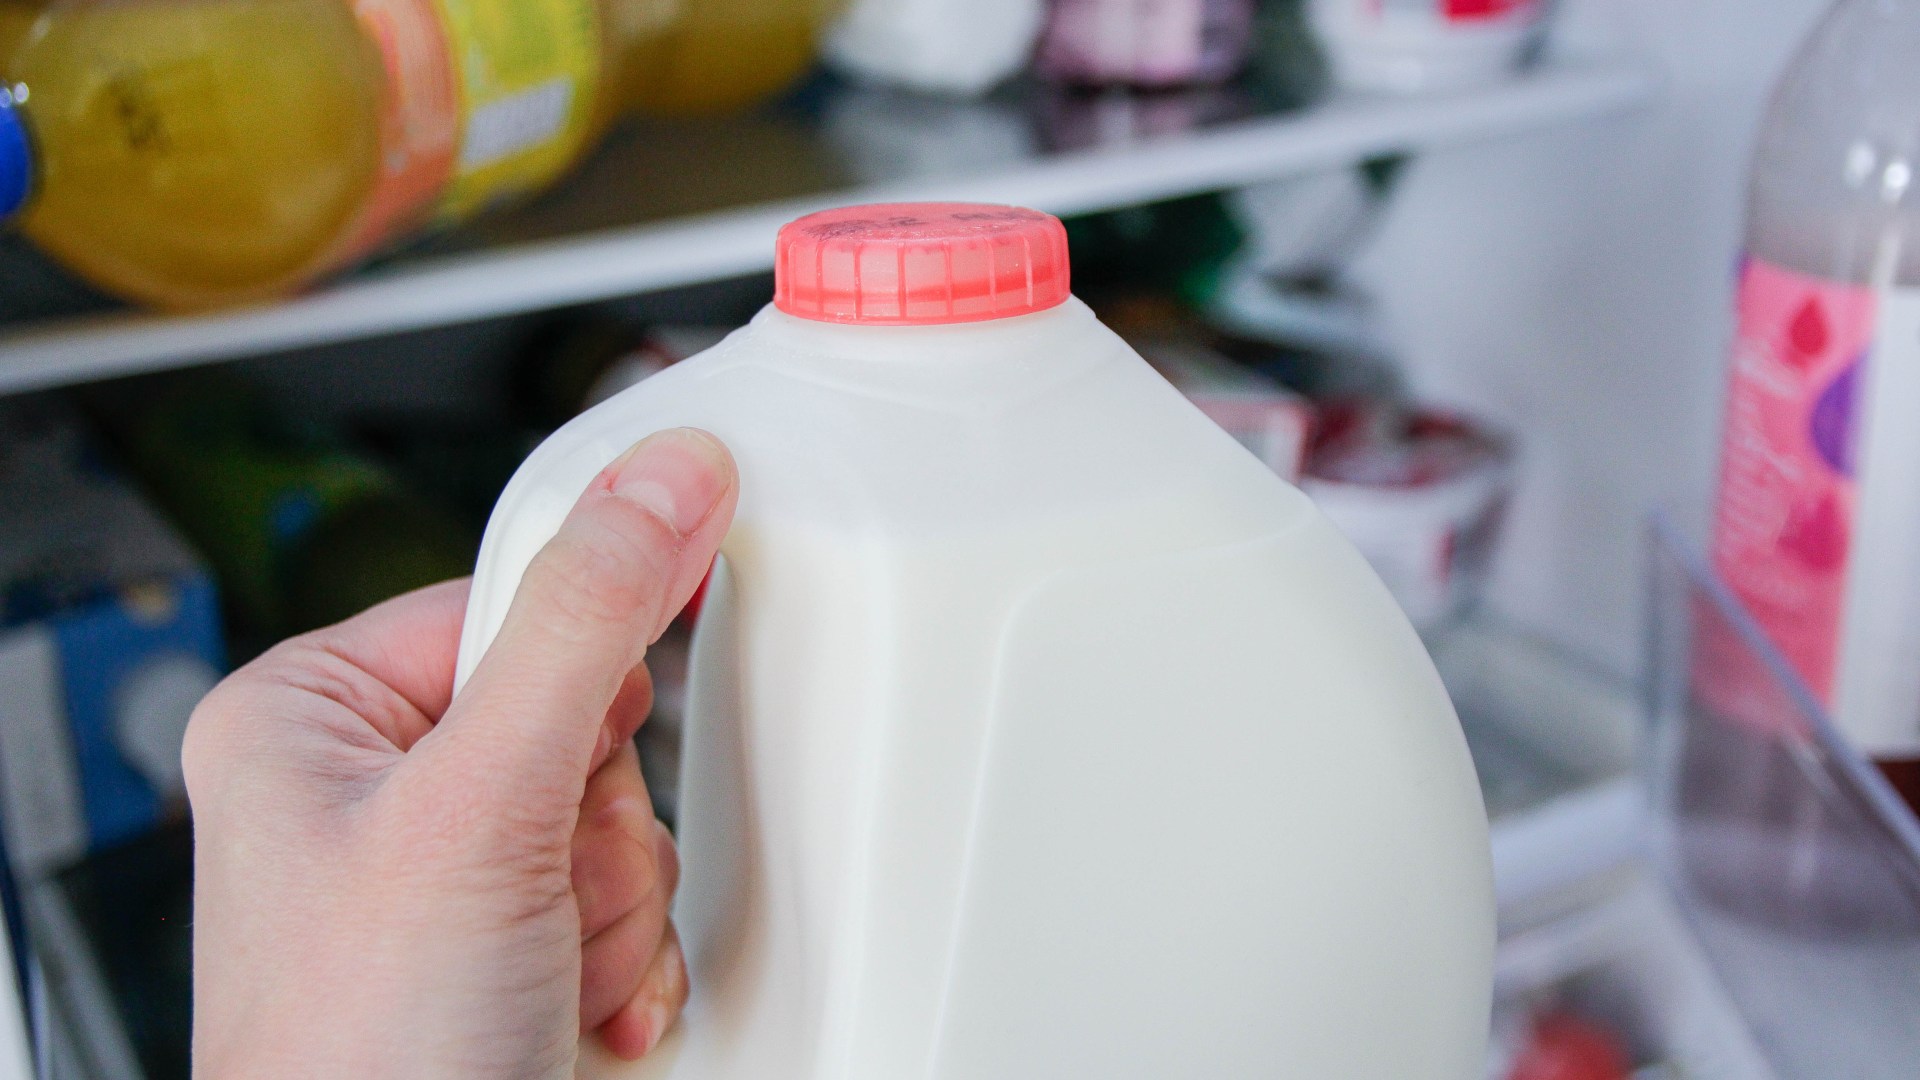 How to get free milk from supermarkets like Iceland, Tesco and Aldi [Video]